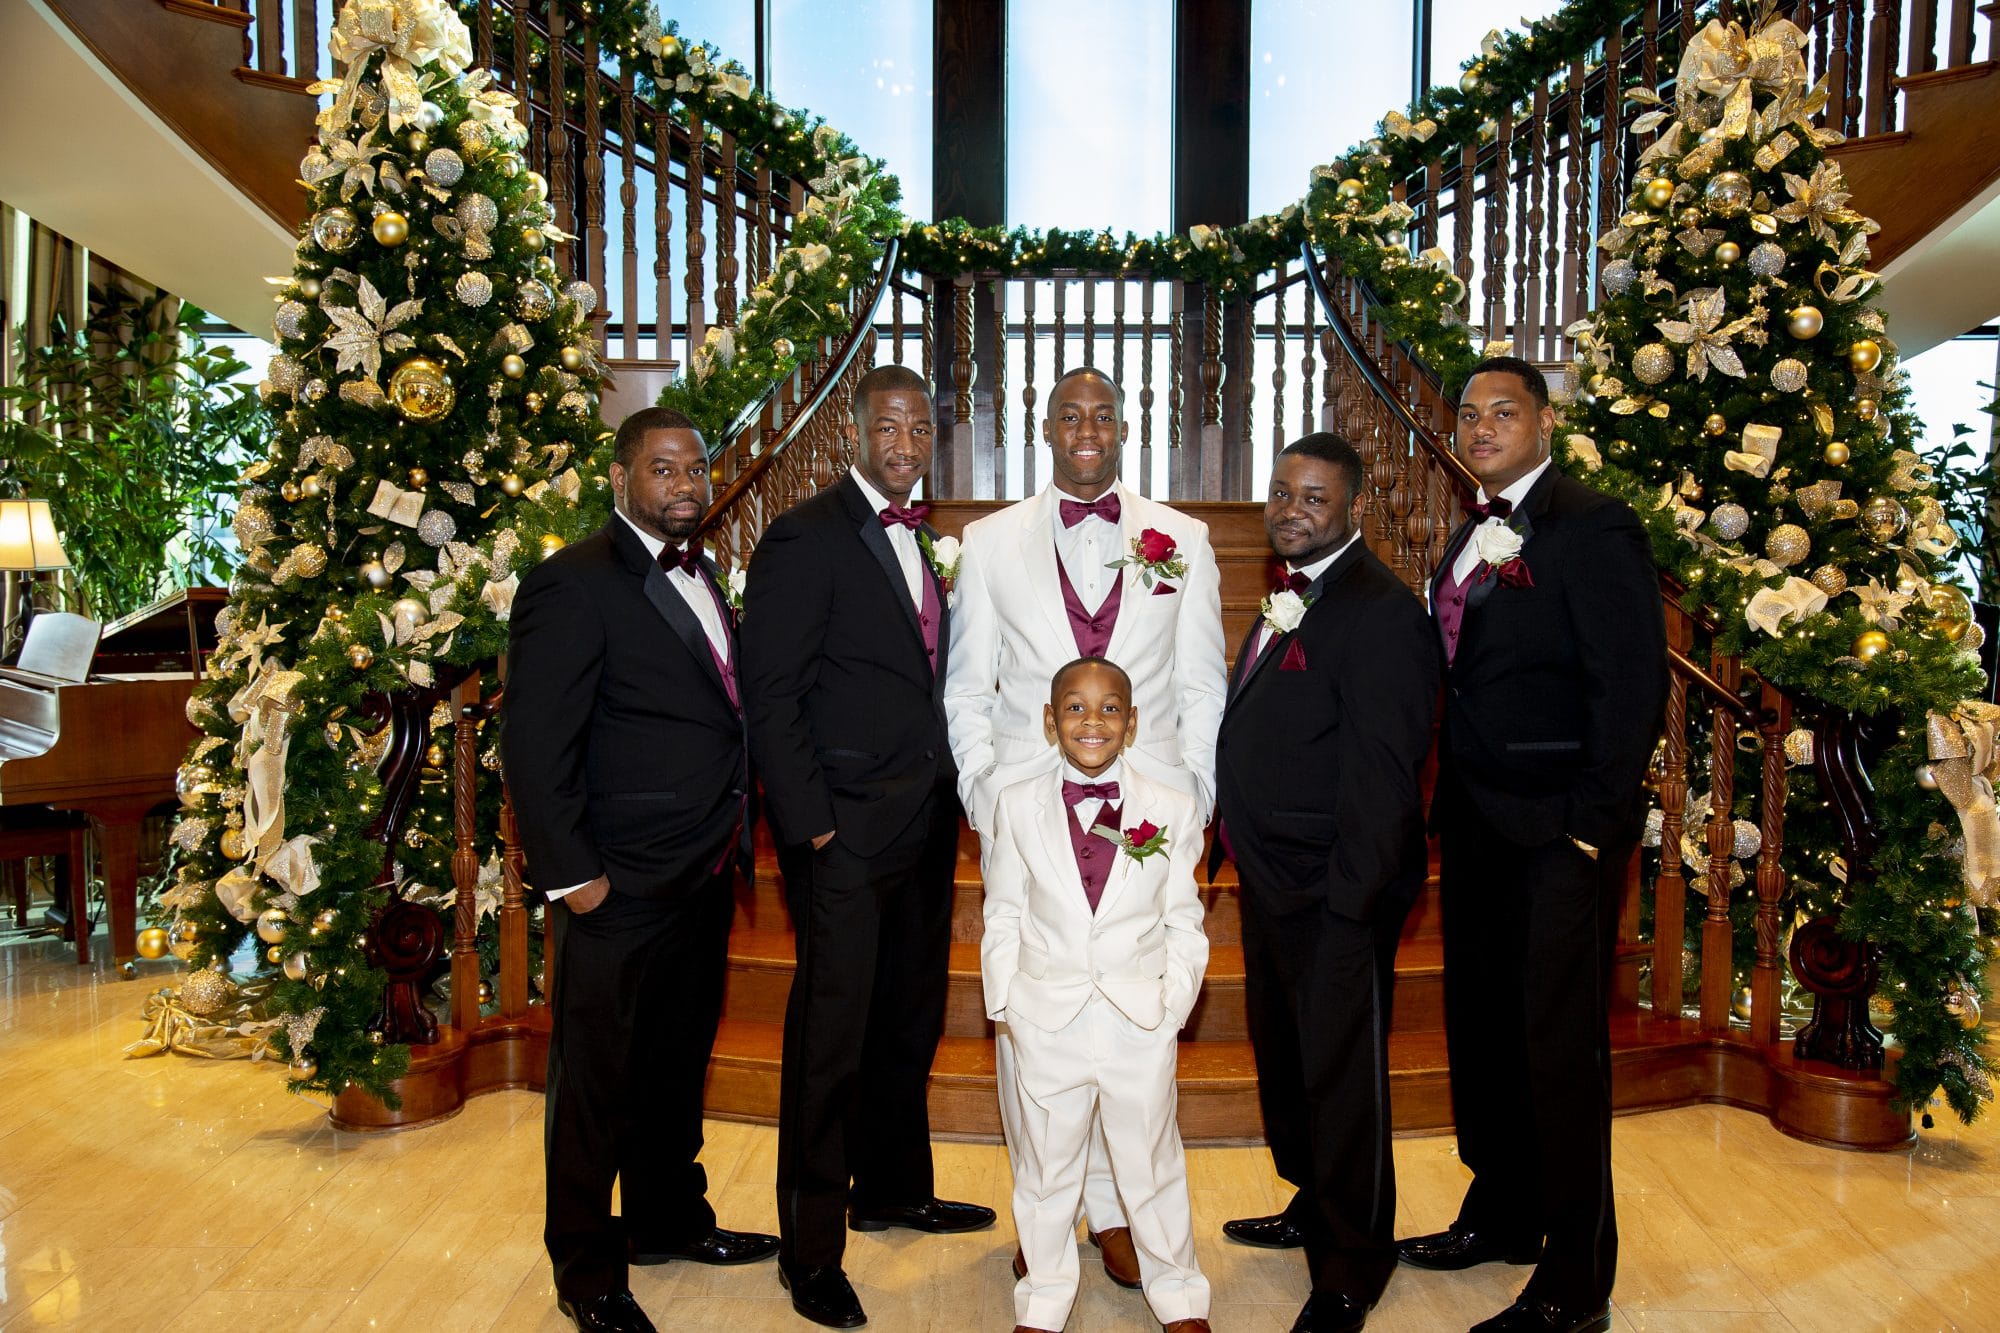 Richard, groomsmen, and ring bearer in front of staircase